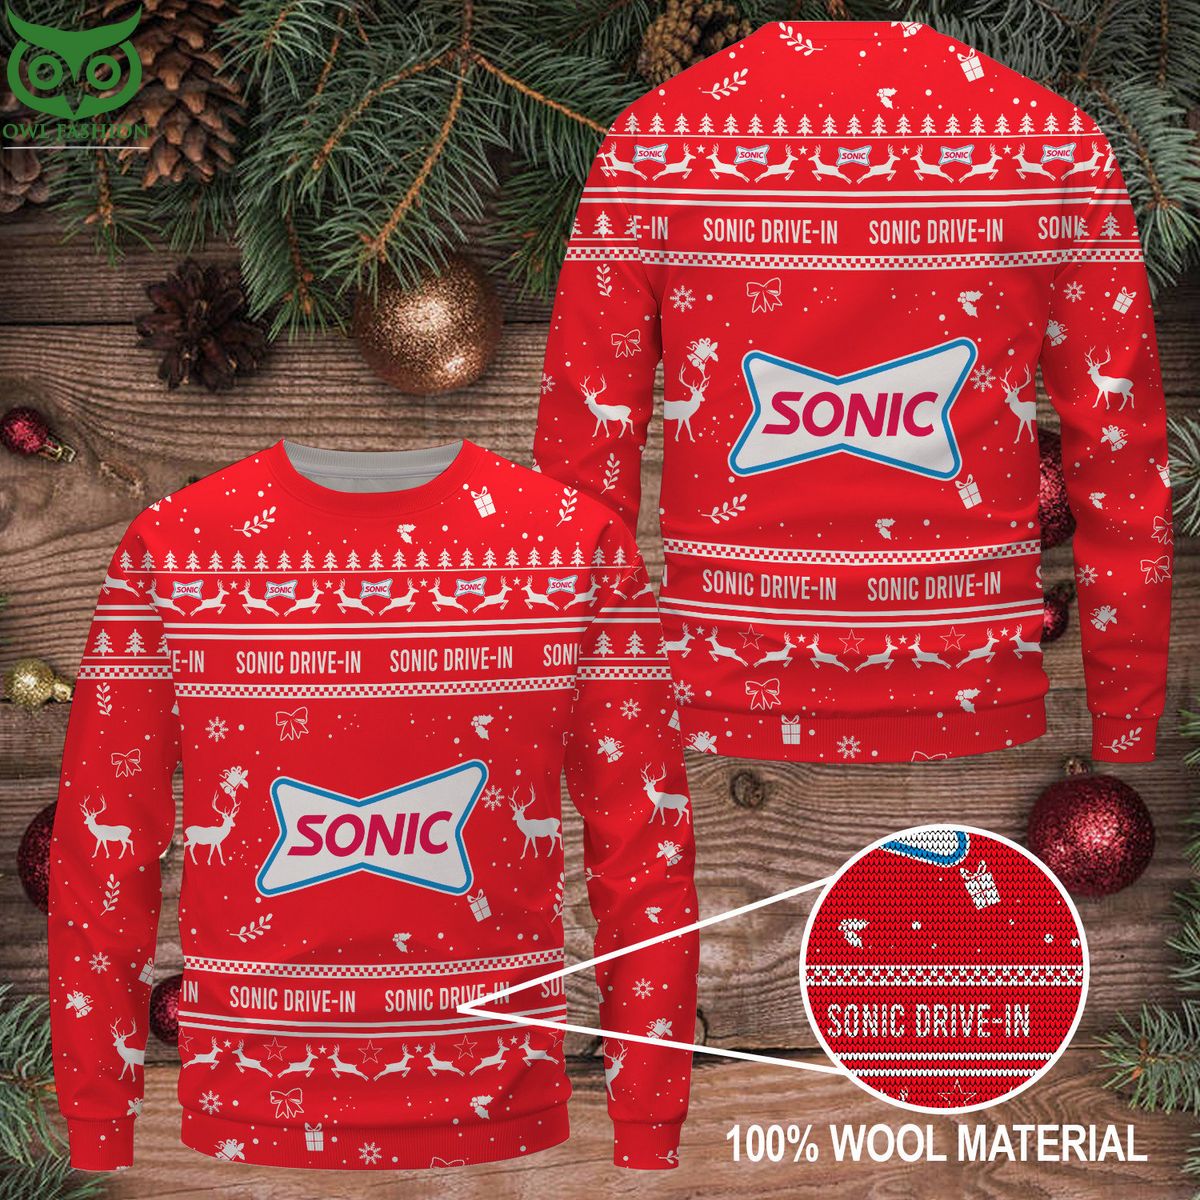 Sonic drive-in Premium Ugly Christmas Sweater